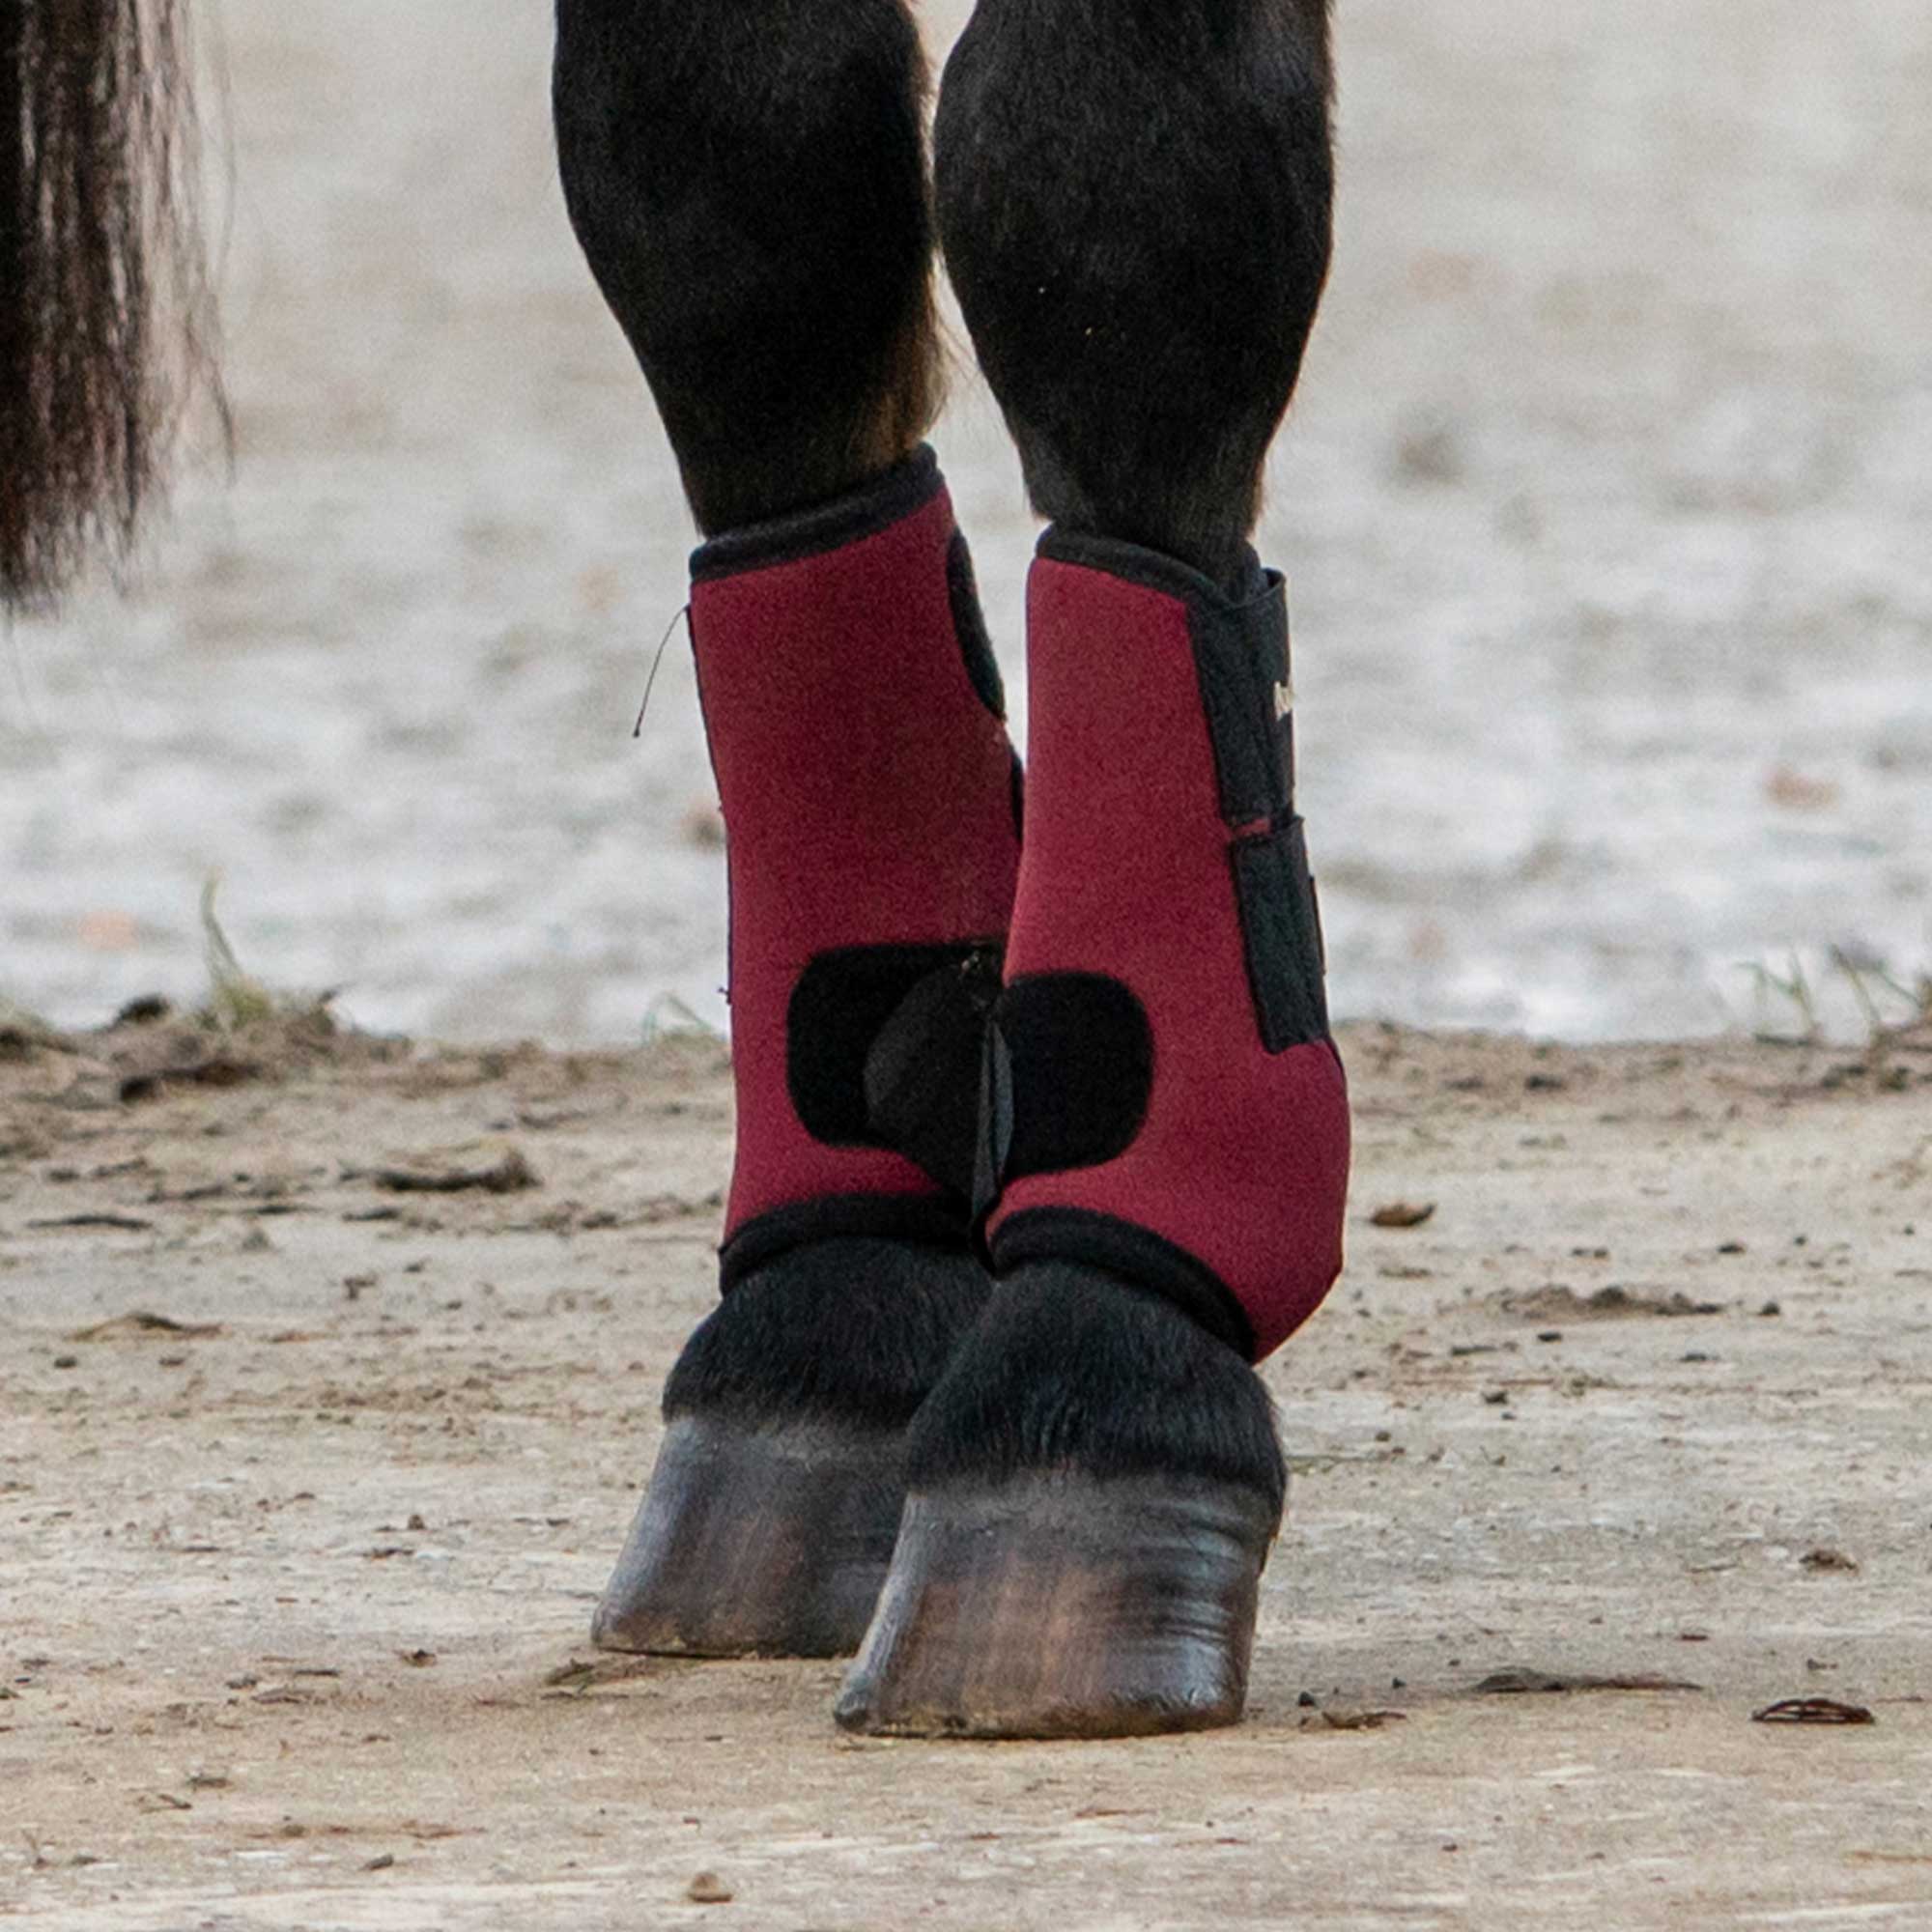 "Opal" Exercise Boots, Front Legs